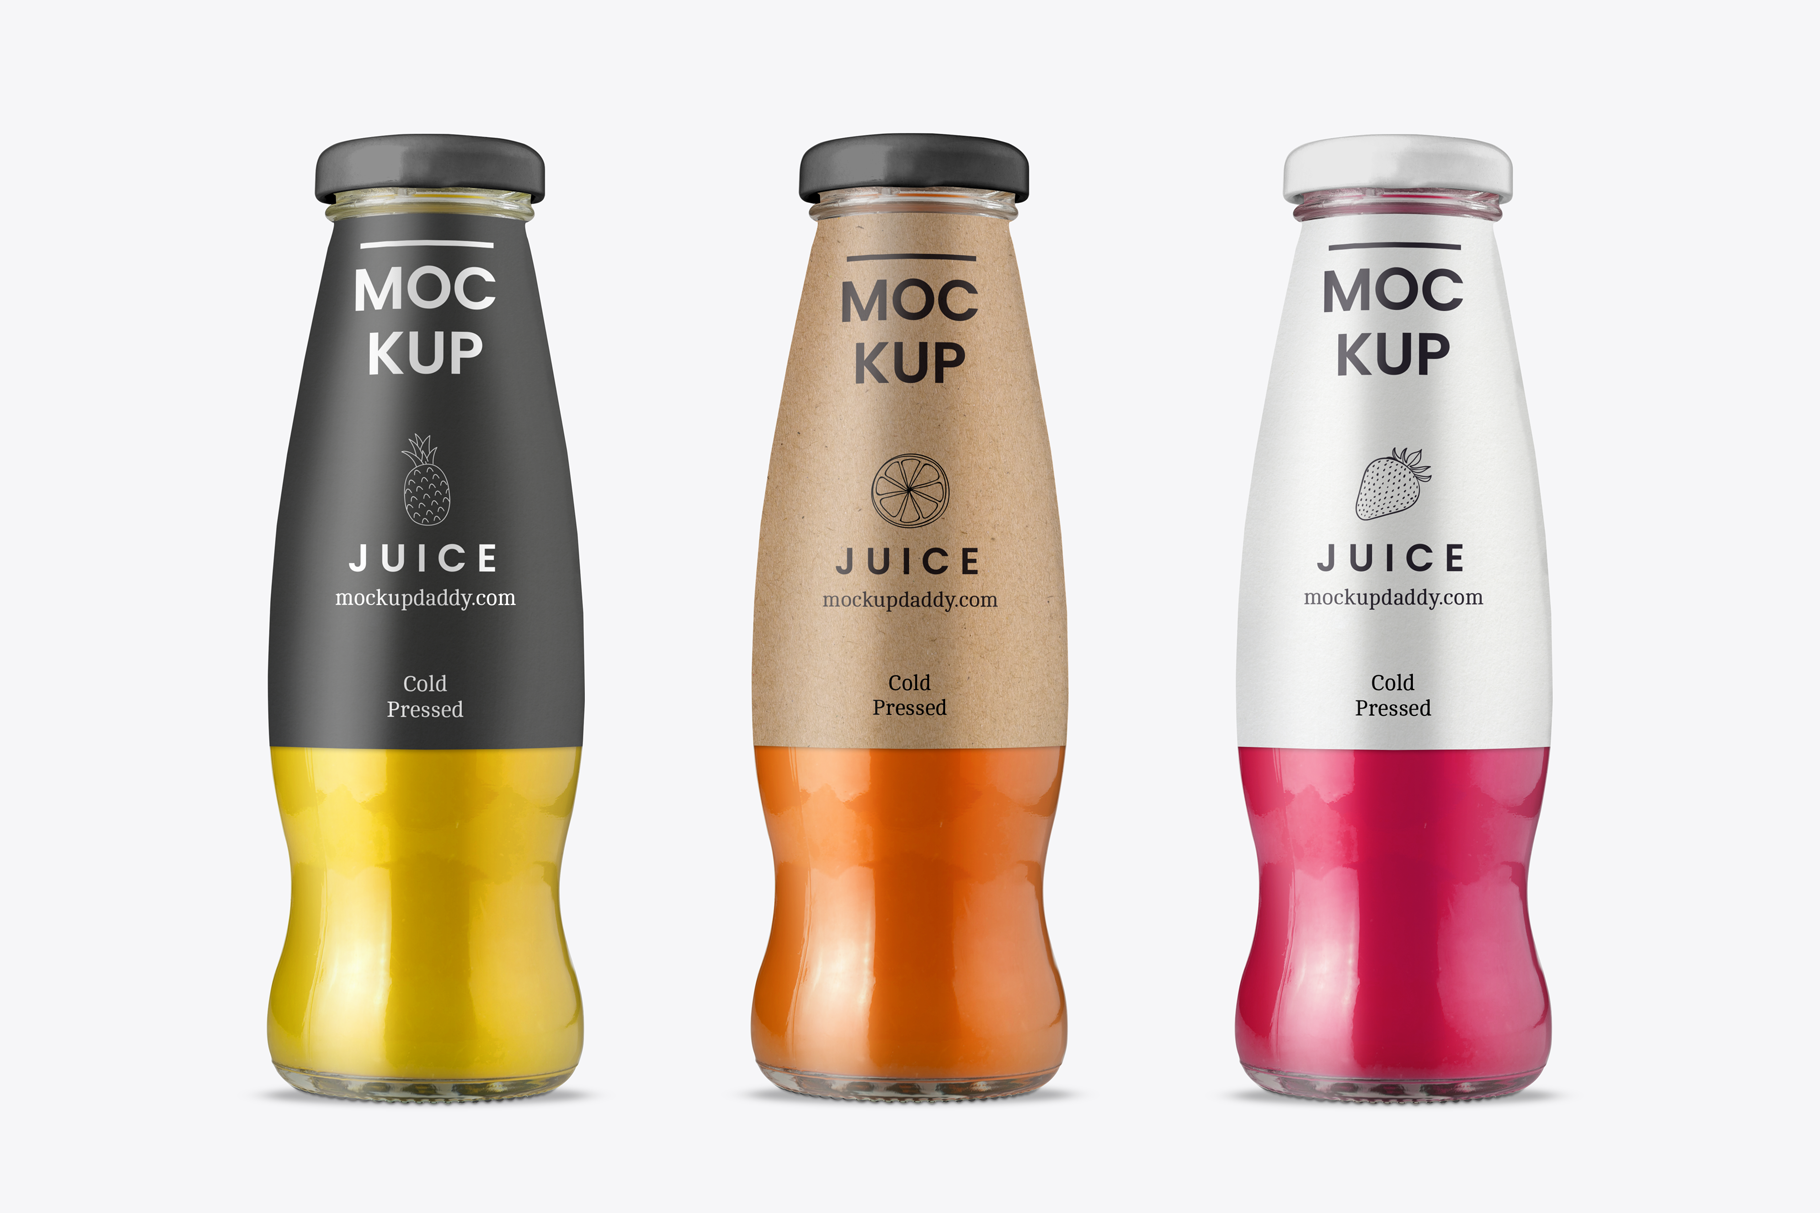  Three Glass Juice Bottle PSD Mockup with different color labels